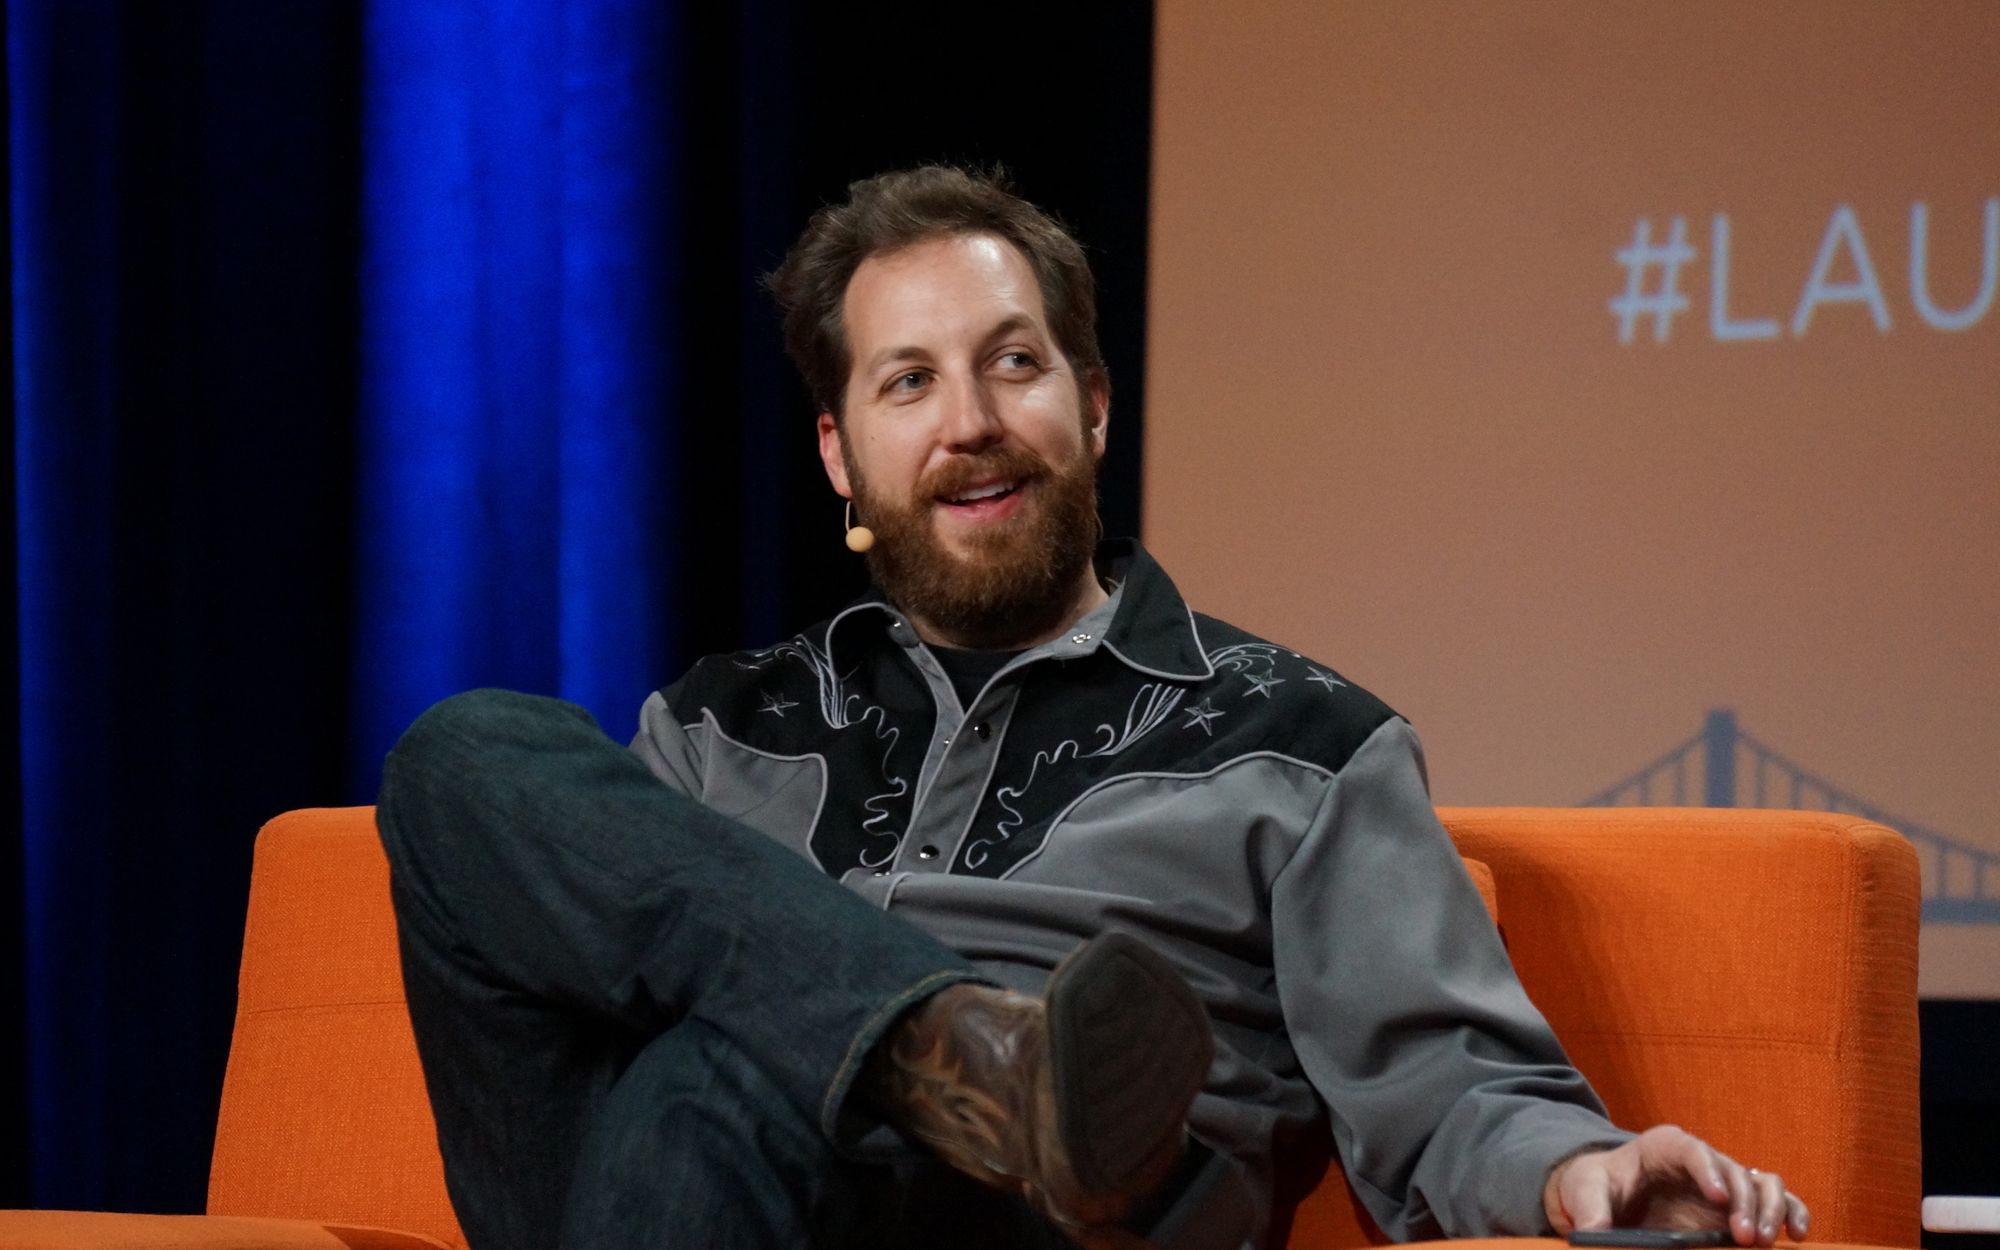 Chris Sacca, founder at Lowercase Capital speaking at the Launch Conference.